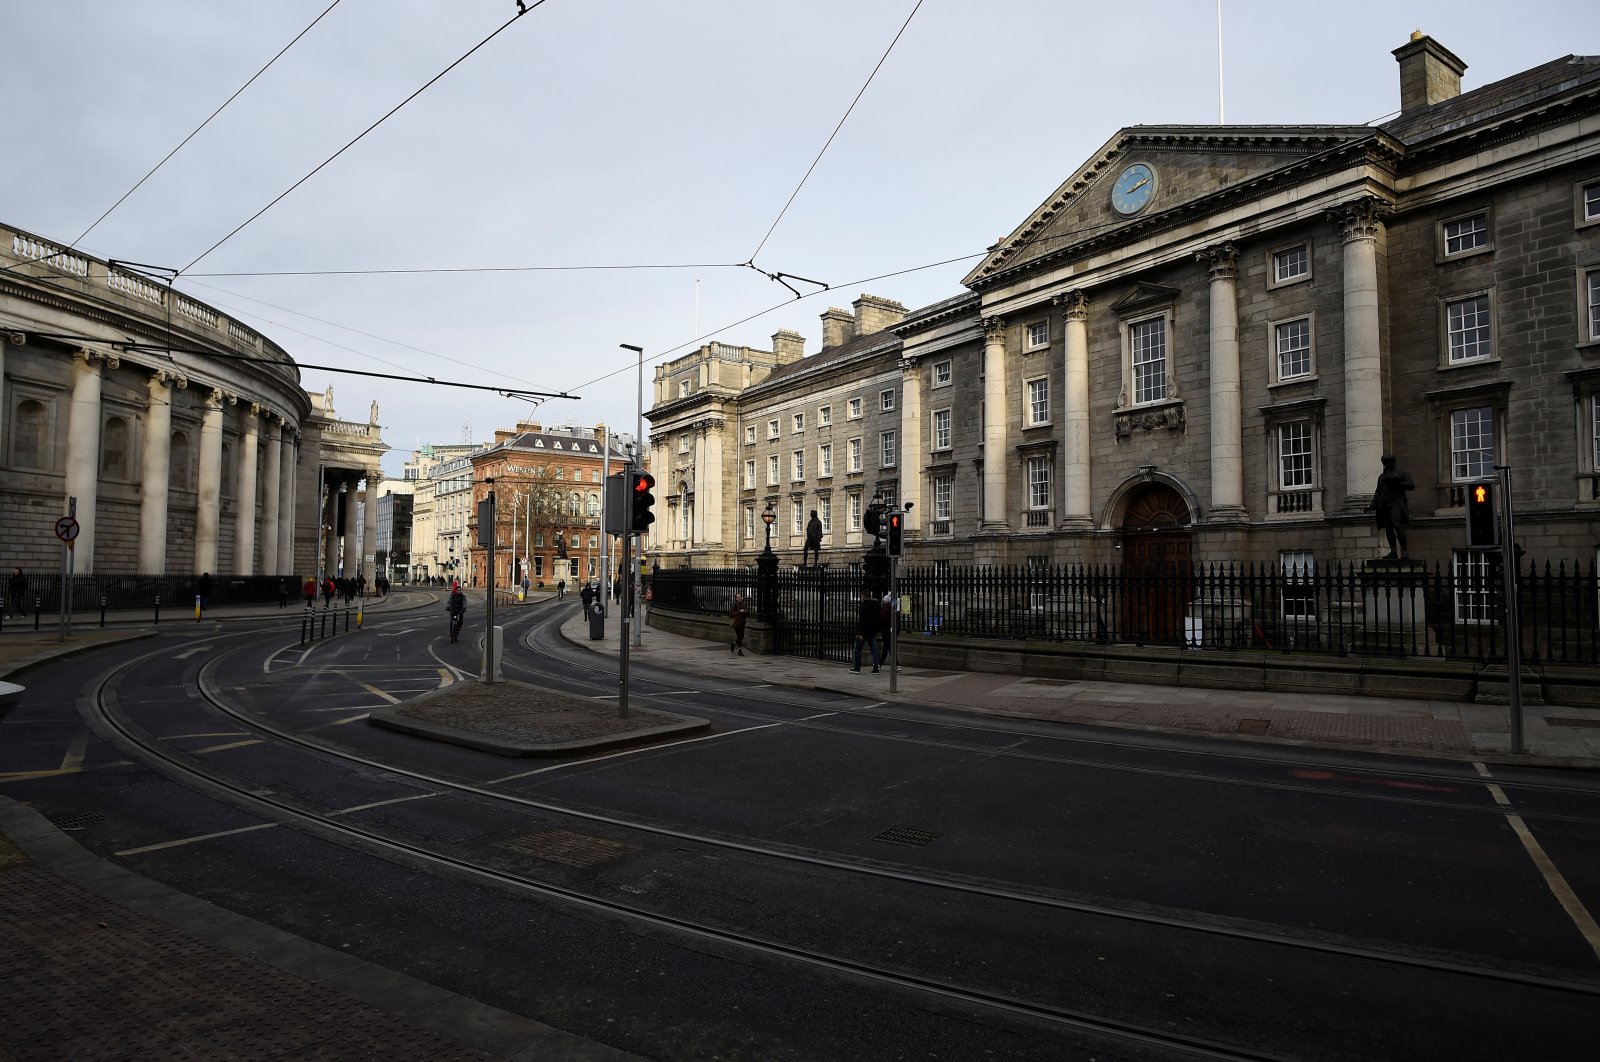 Empty streets are seen outside Trinity College during the government's lockdown restrictions, amid the spread of the coronavirus pandemic, in the city centre of Dublin, Ireland, Jan. 23, 2021. REUTERS/Clodagh Kilcoyne